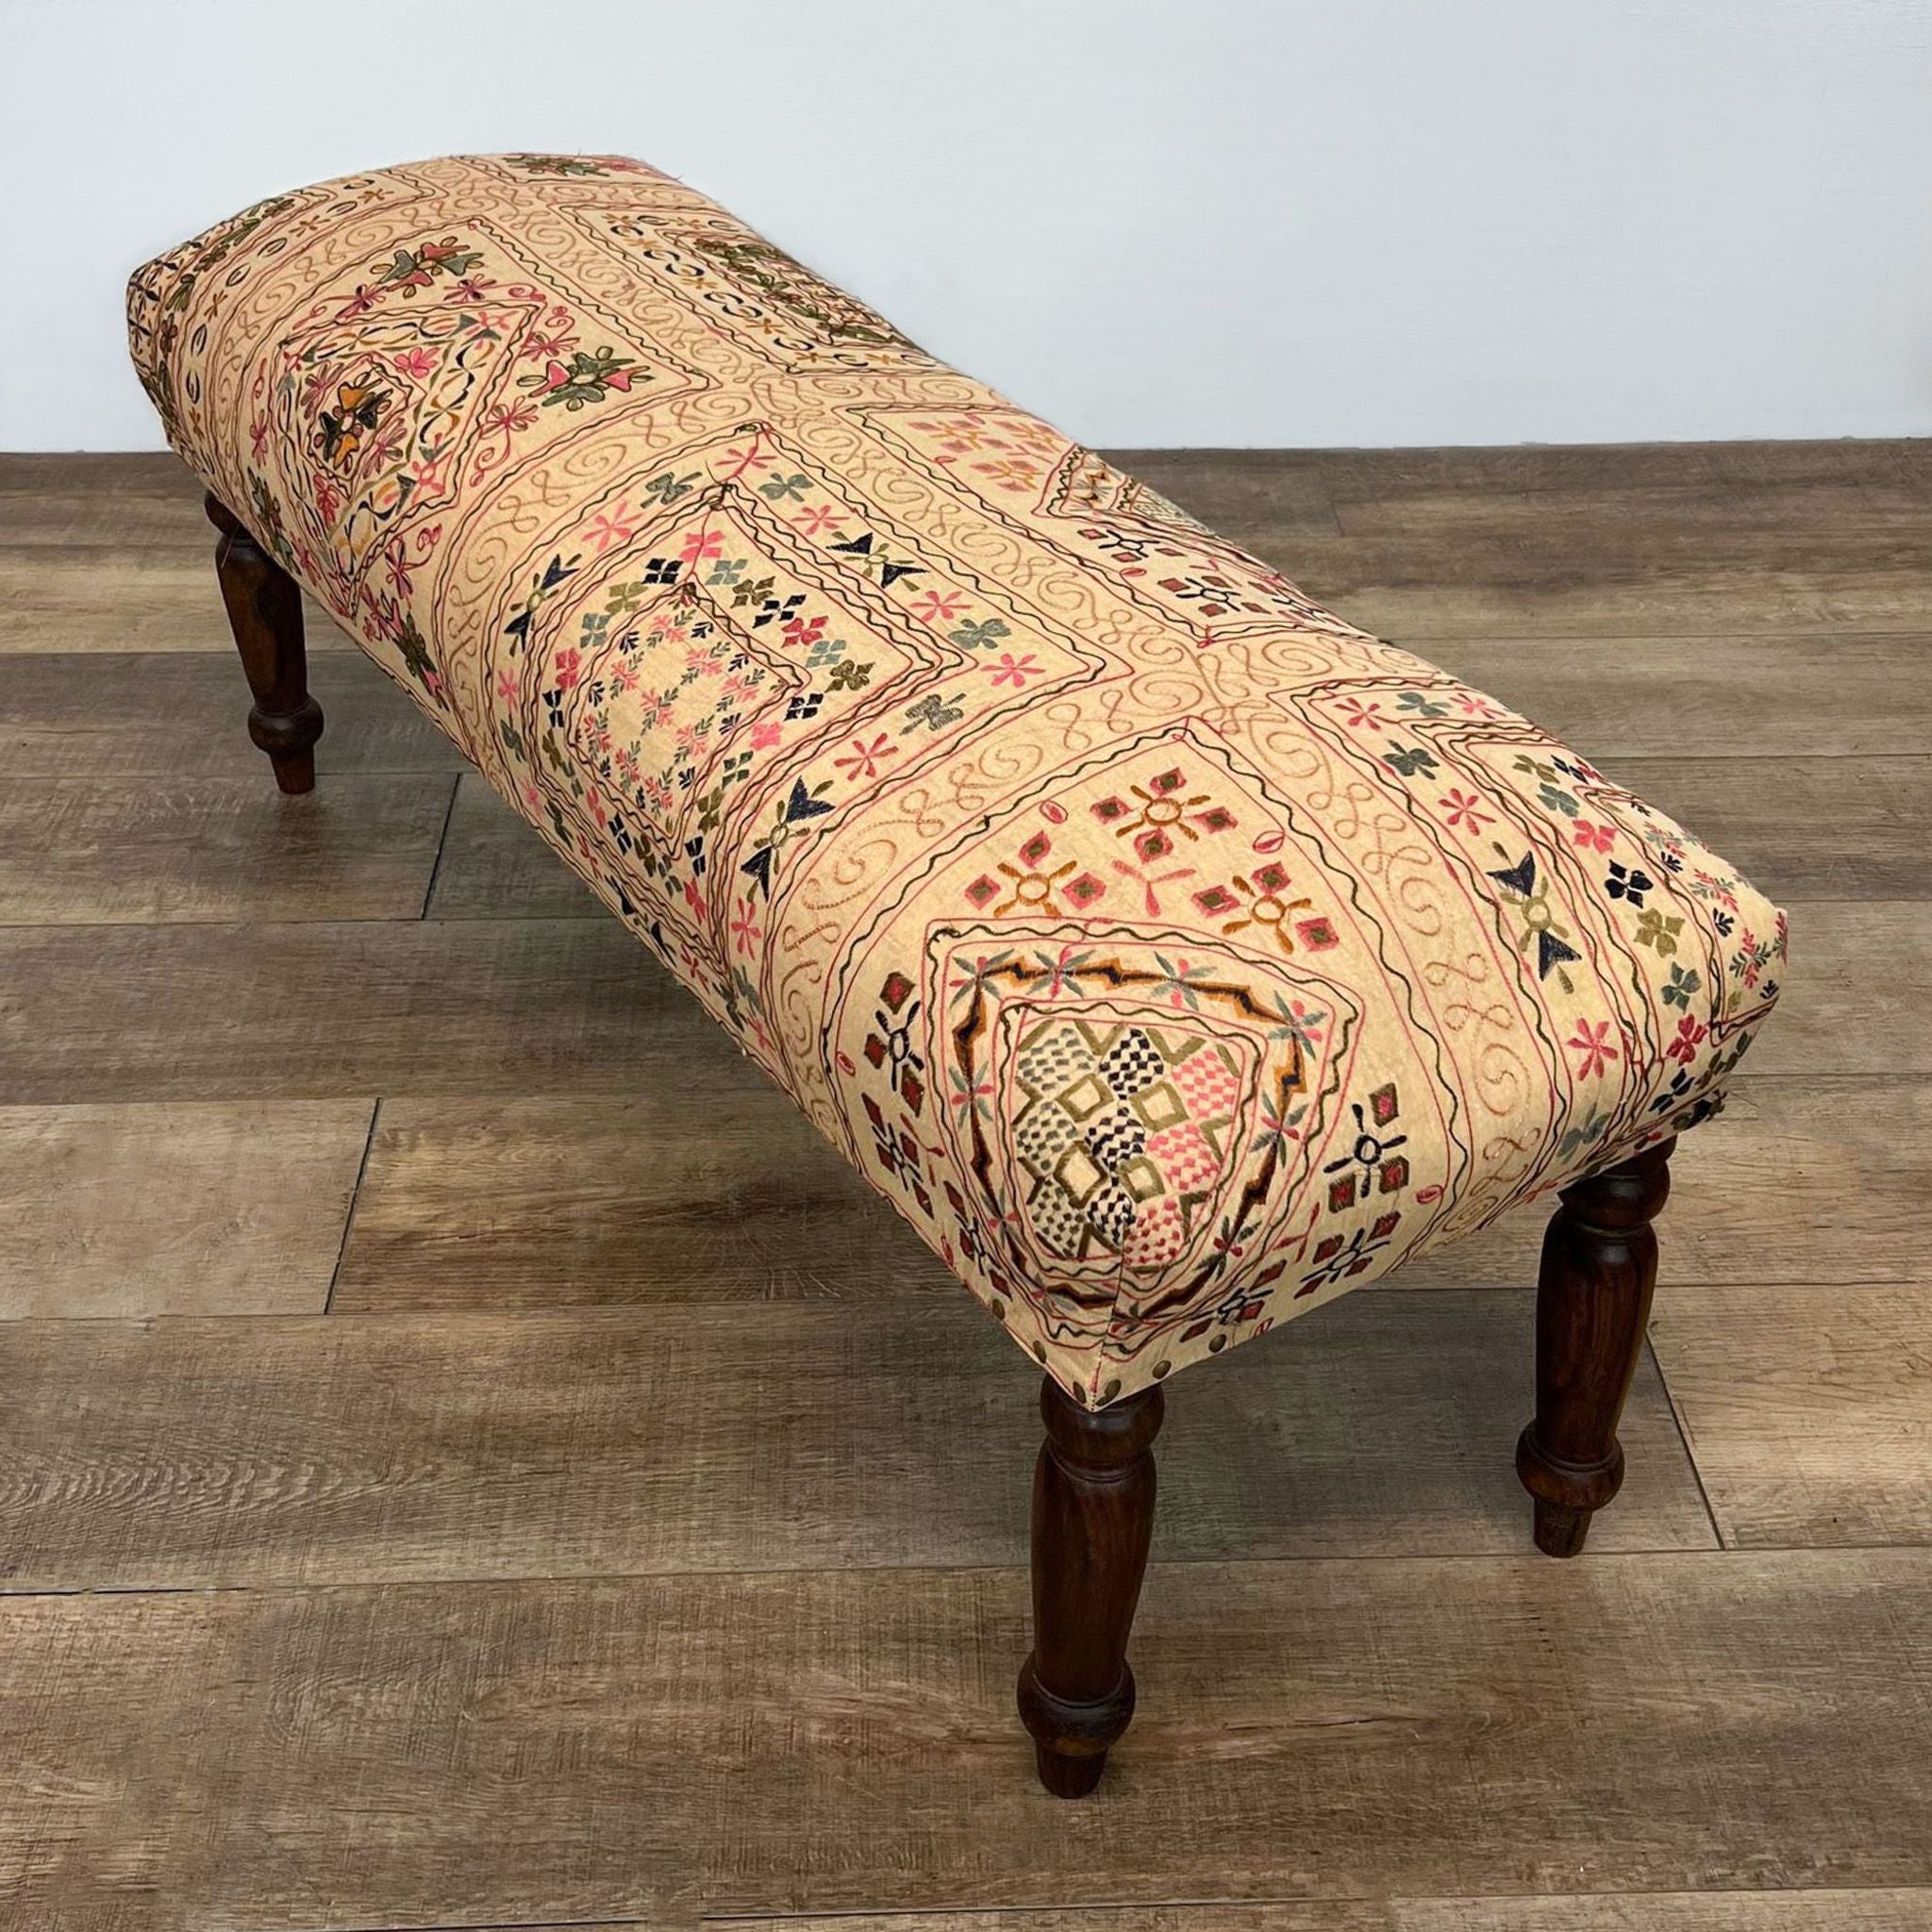 Whimsical fabric upholstered Reperch seat bench with patterned design on solid wood legs.